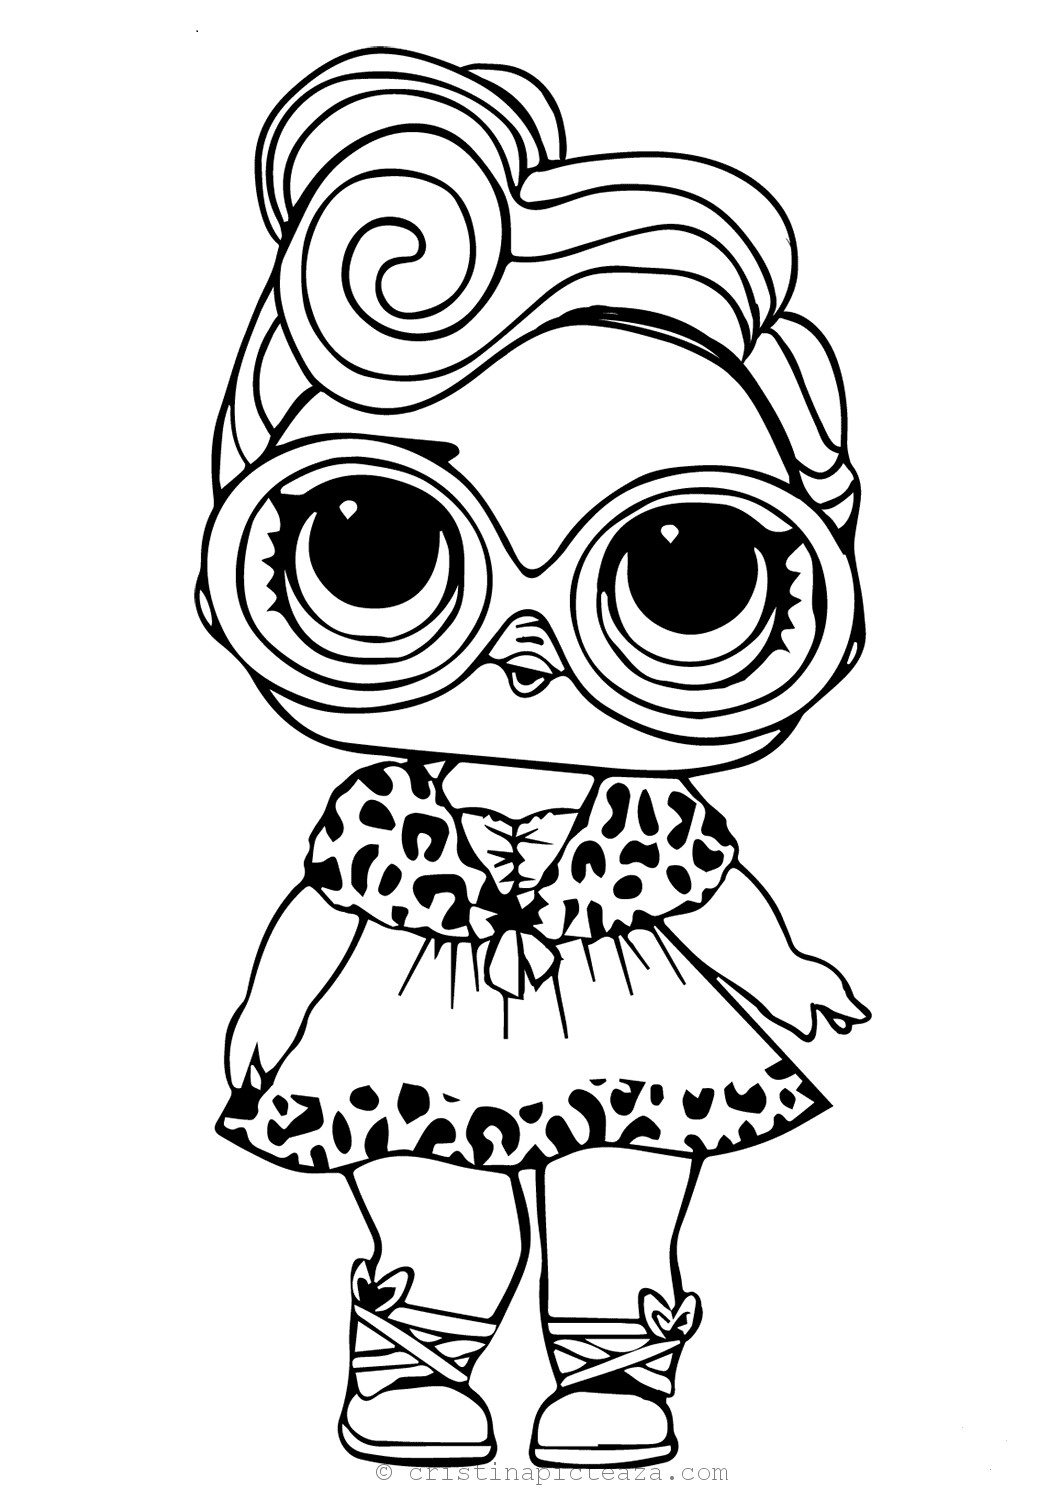 Lol Doll Coloring Pages Printable
 LOL Coloring pages Lol Dolls for Coloring and Painting